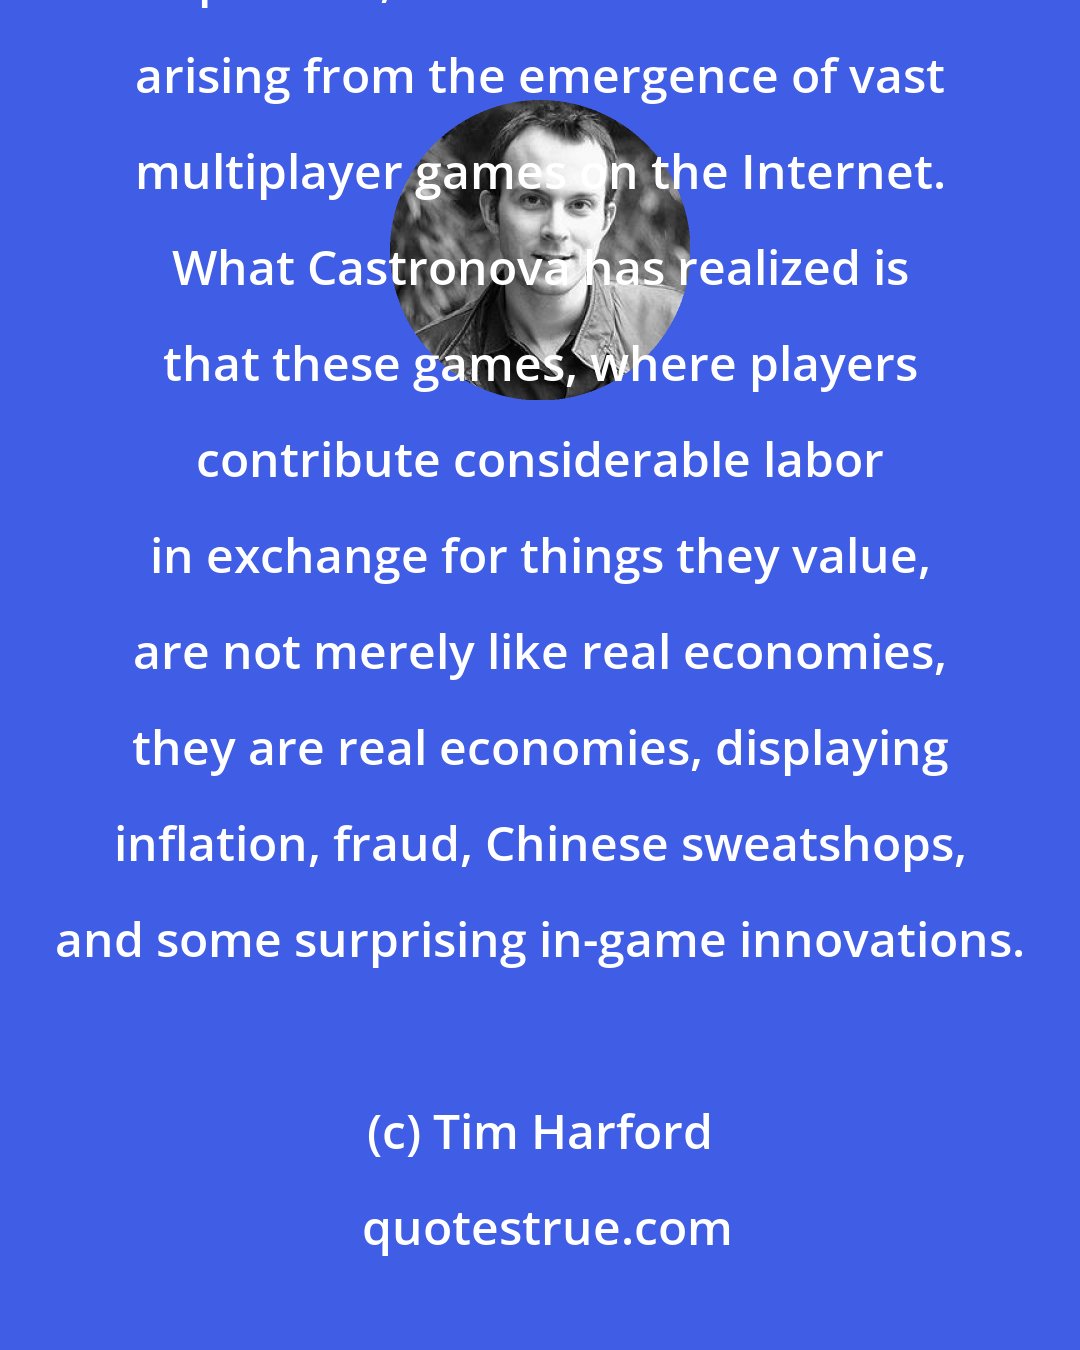 Tim Harford: Synthetic Worlds is a surprisingly profound book about the social, political, and economic issues arising from the emergence of vast multiplayer games on the Internet. What Castronova has realized is that these games, where players contribute considerable labor in exchange for things they value, are not merely like real economies, they are real economies, displaying inflation, fraud, Chinese sweatshops, and some surprising in-game innovations.